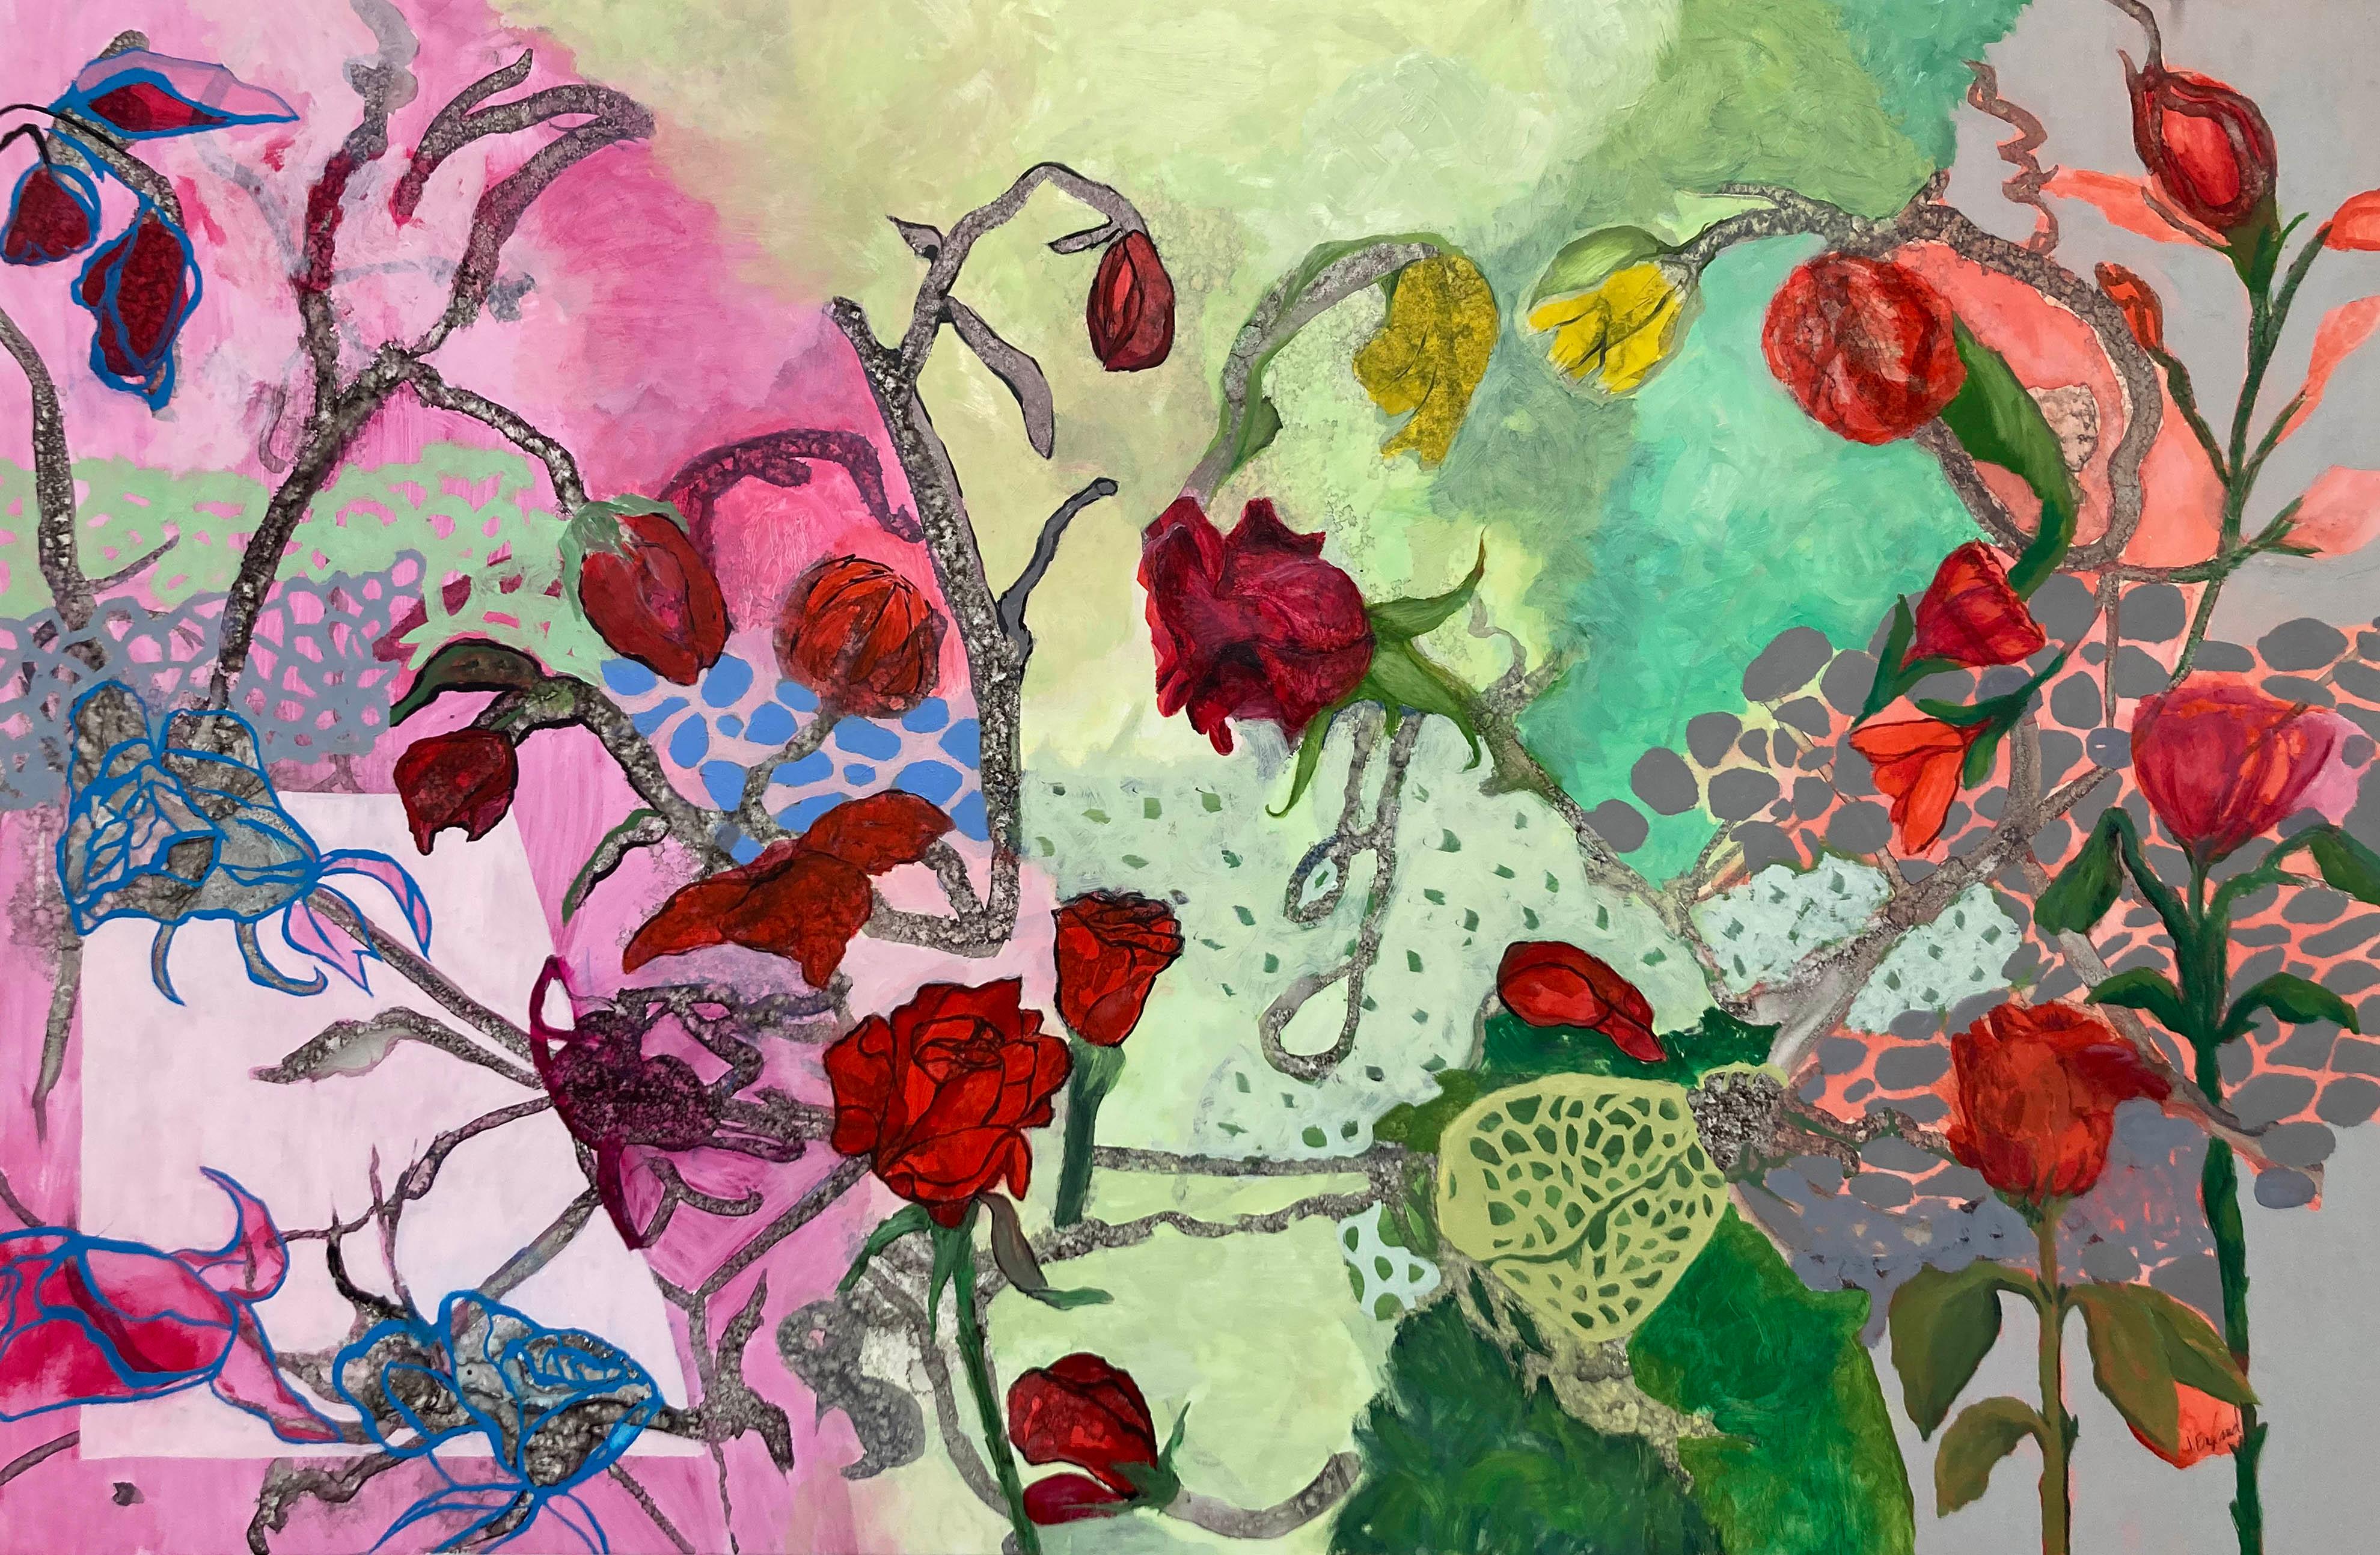 Julie England Landscape Painting - Red Roses  Ink,  Watercolor, Oil on Yupo 26″ x 40″ Image 31 1/4″ x 45 1/4″ Frame